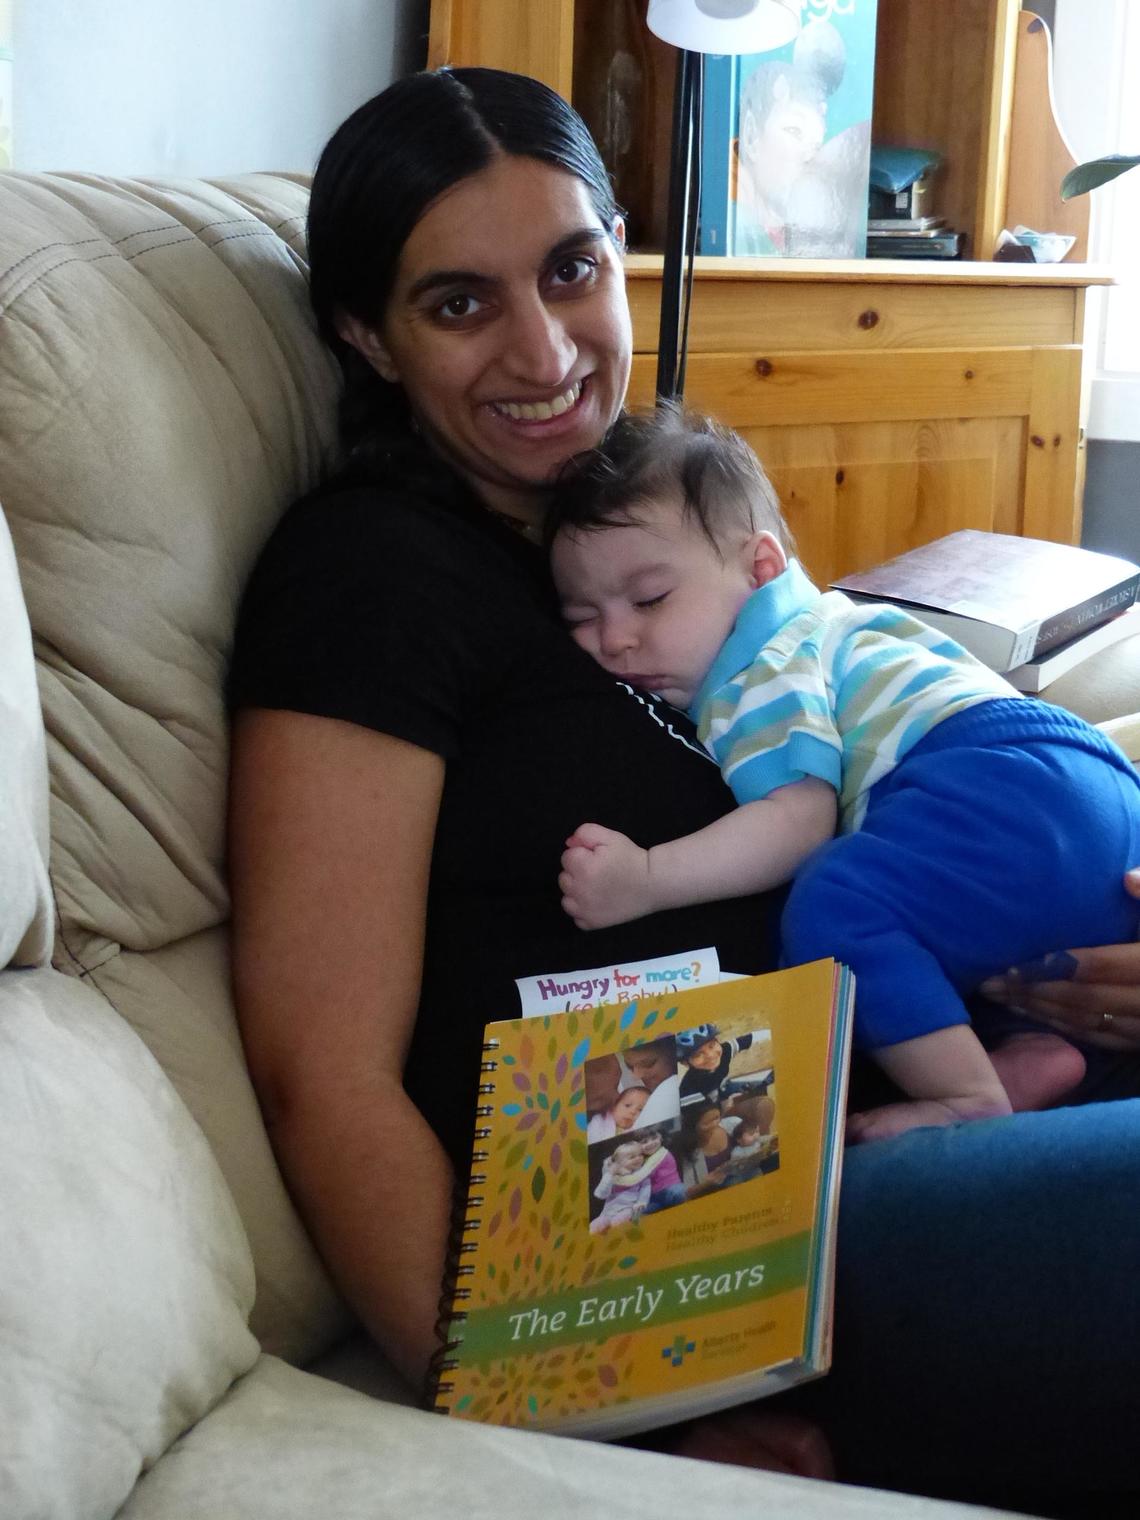 Inarah, a mother who participated in the study, pictured here with her son Issac used the Healthy Parents, Healthy Children book for information related to her son and her three-year-old daughter.